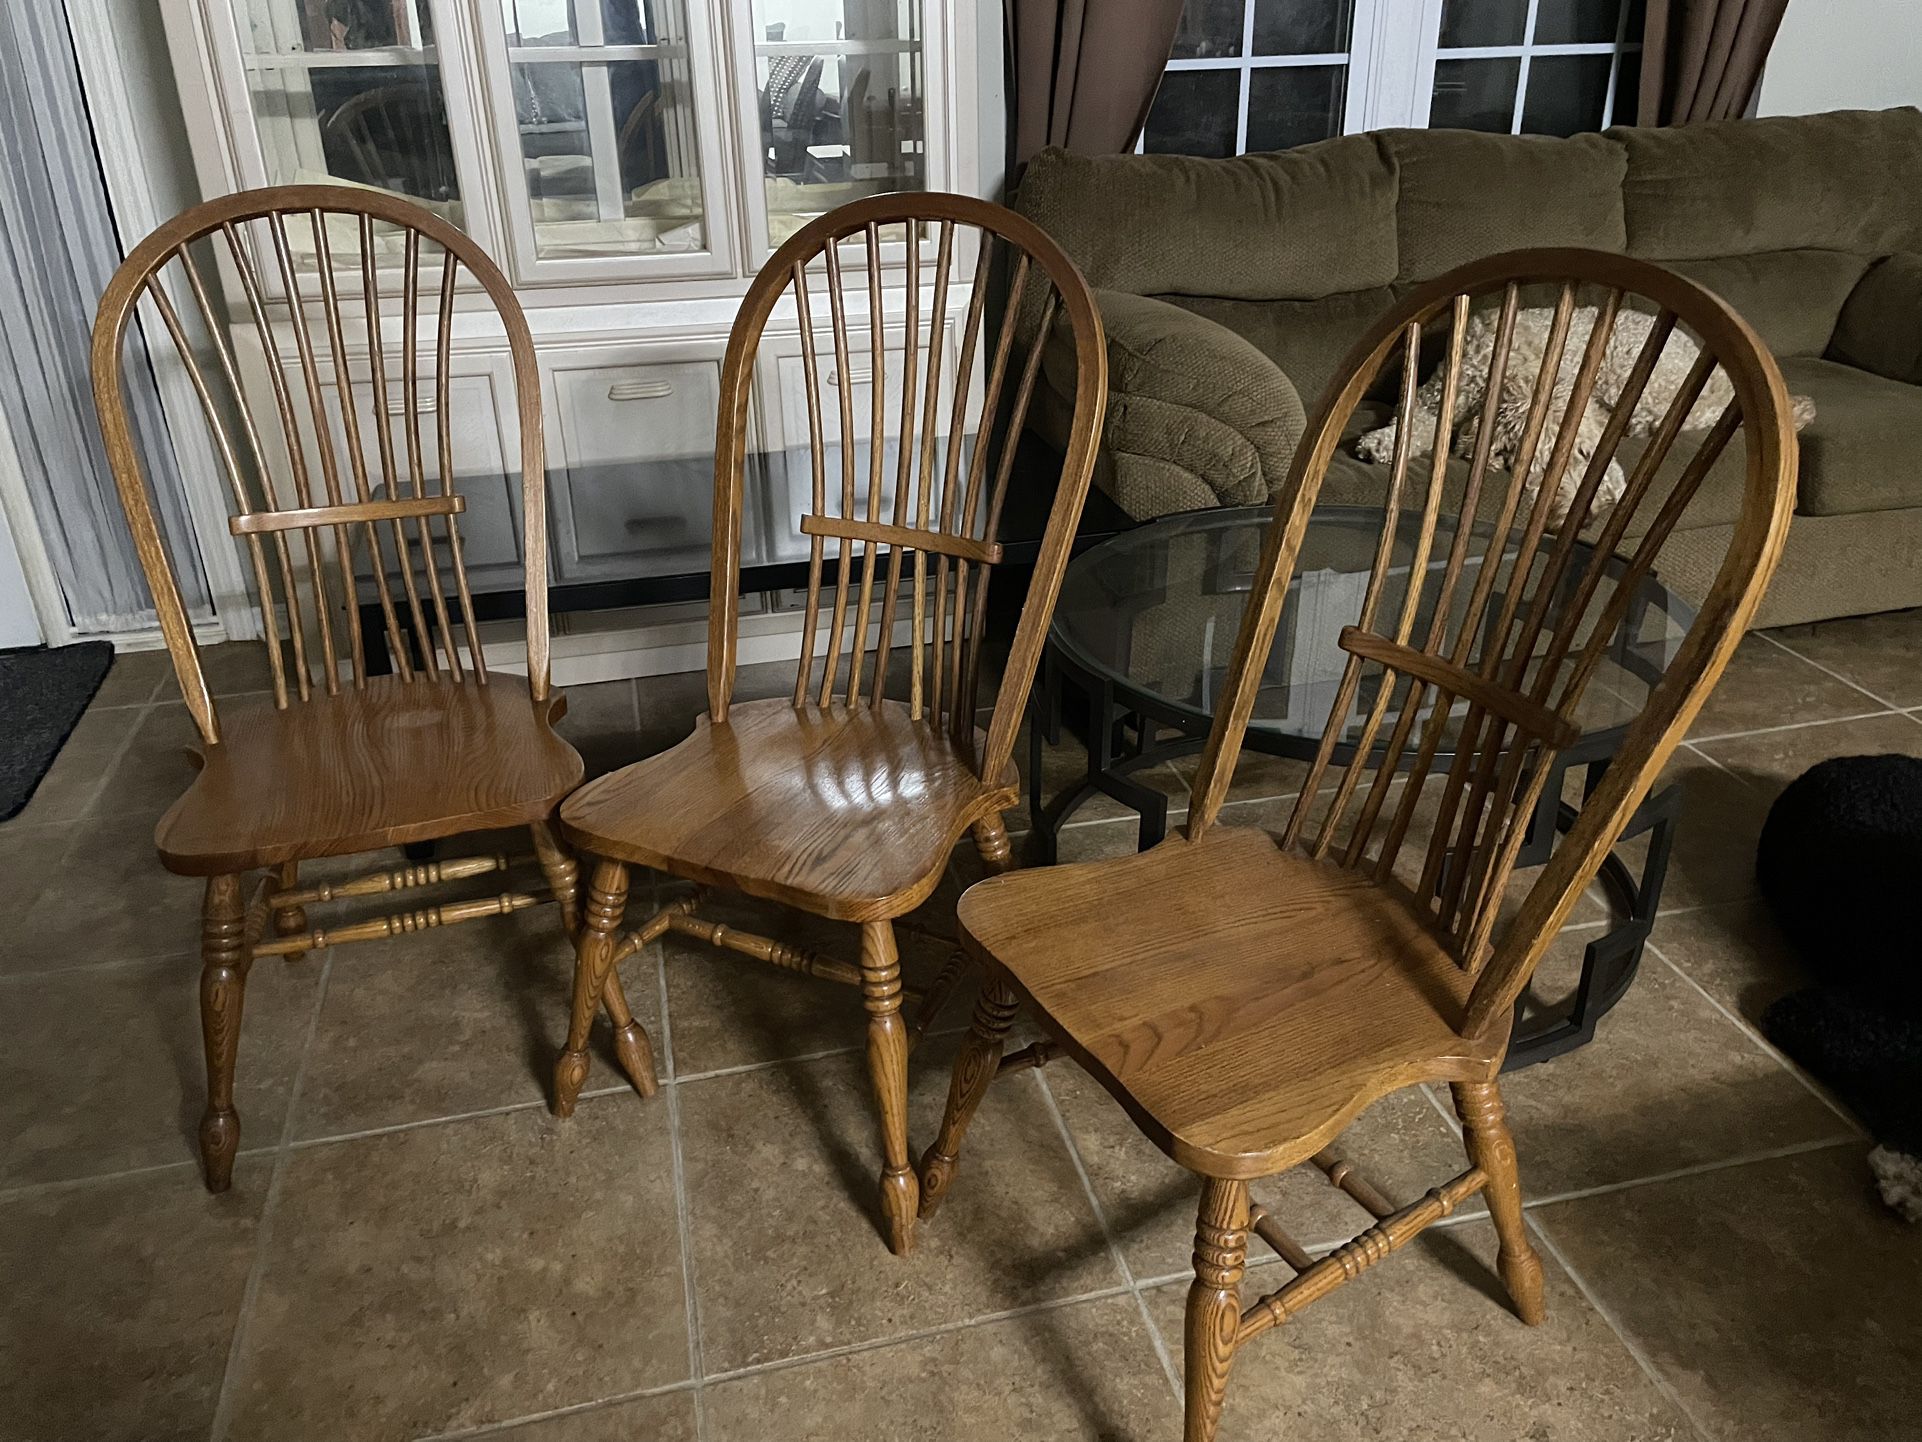 3 Oak Spindle Dining Room Chairs